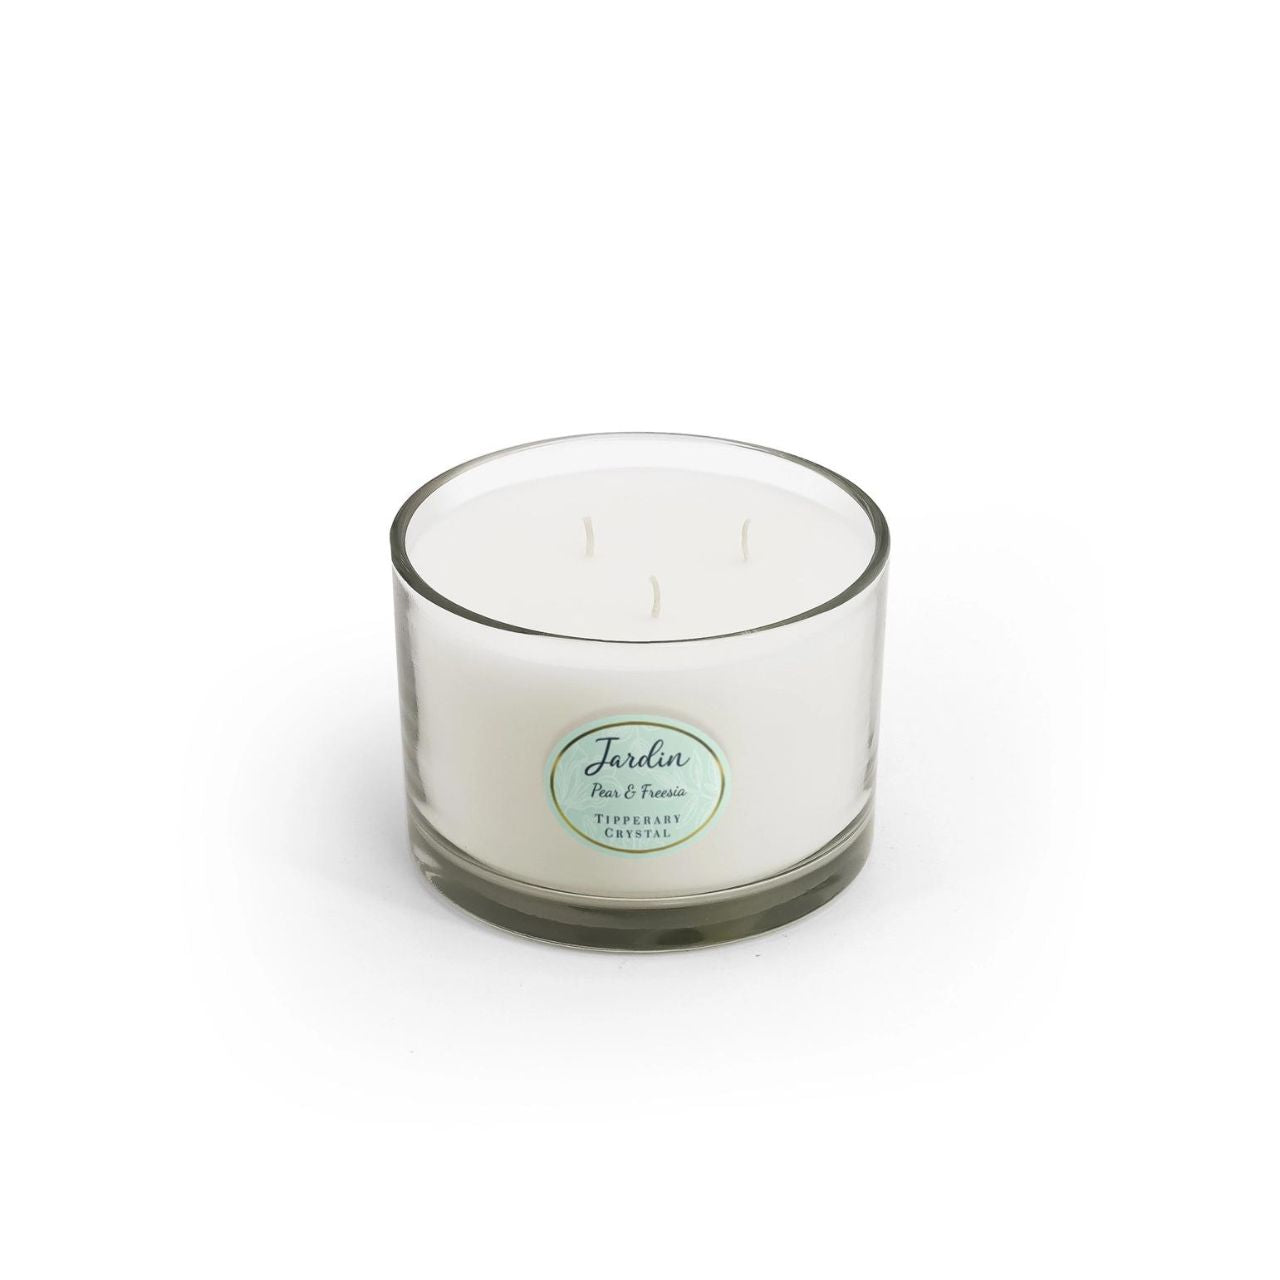 Tipperary Crystal Jardin Collection 3 Wick Candle - White Jasmine  Jardin Collection 3 Wick Candle - White Jasmine  White Jasmine The first scent will transport you to a quaint English cottage with windows opening out to a sun-drenched garden filled with beautiful white jasmine. The Delicate scent of Jasmine will create an atmosphere of calm and relaxation, while just-cut wild mint adds a dash of eccentricity to this beautiful bouquet.